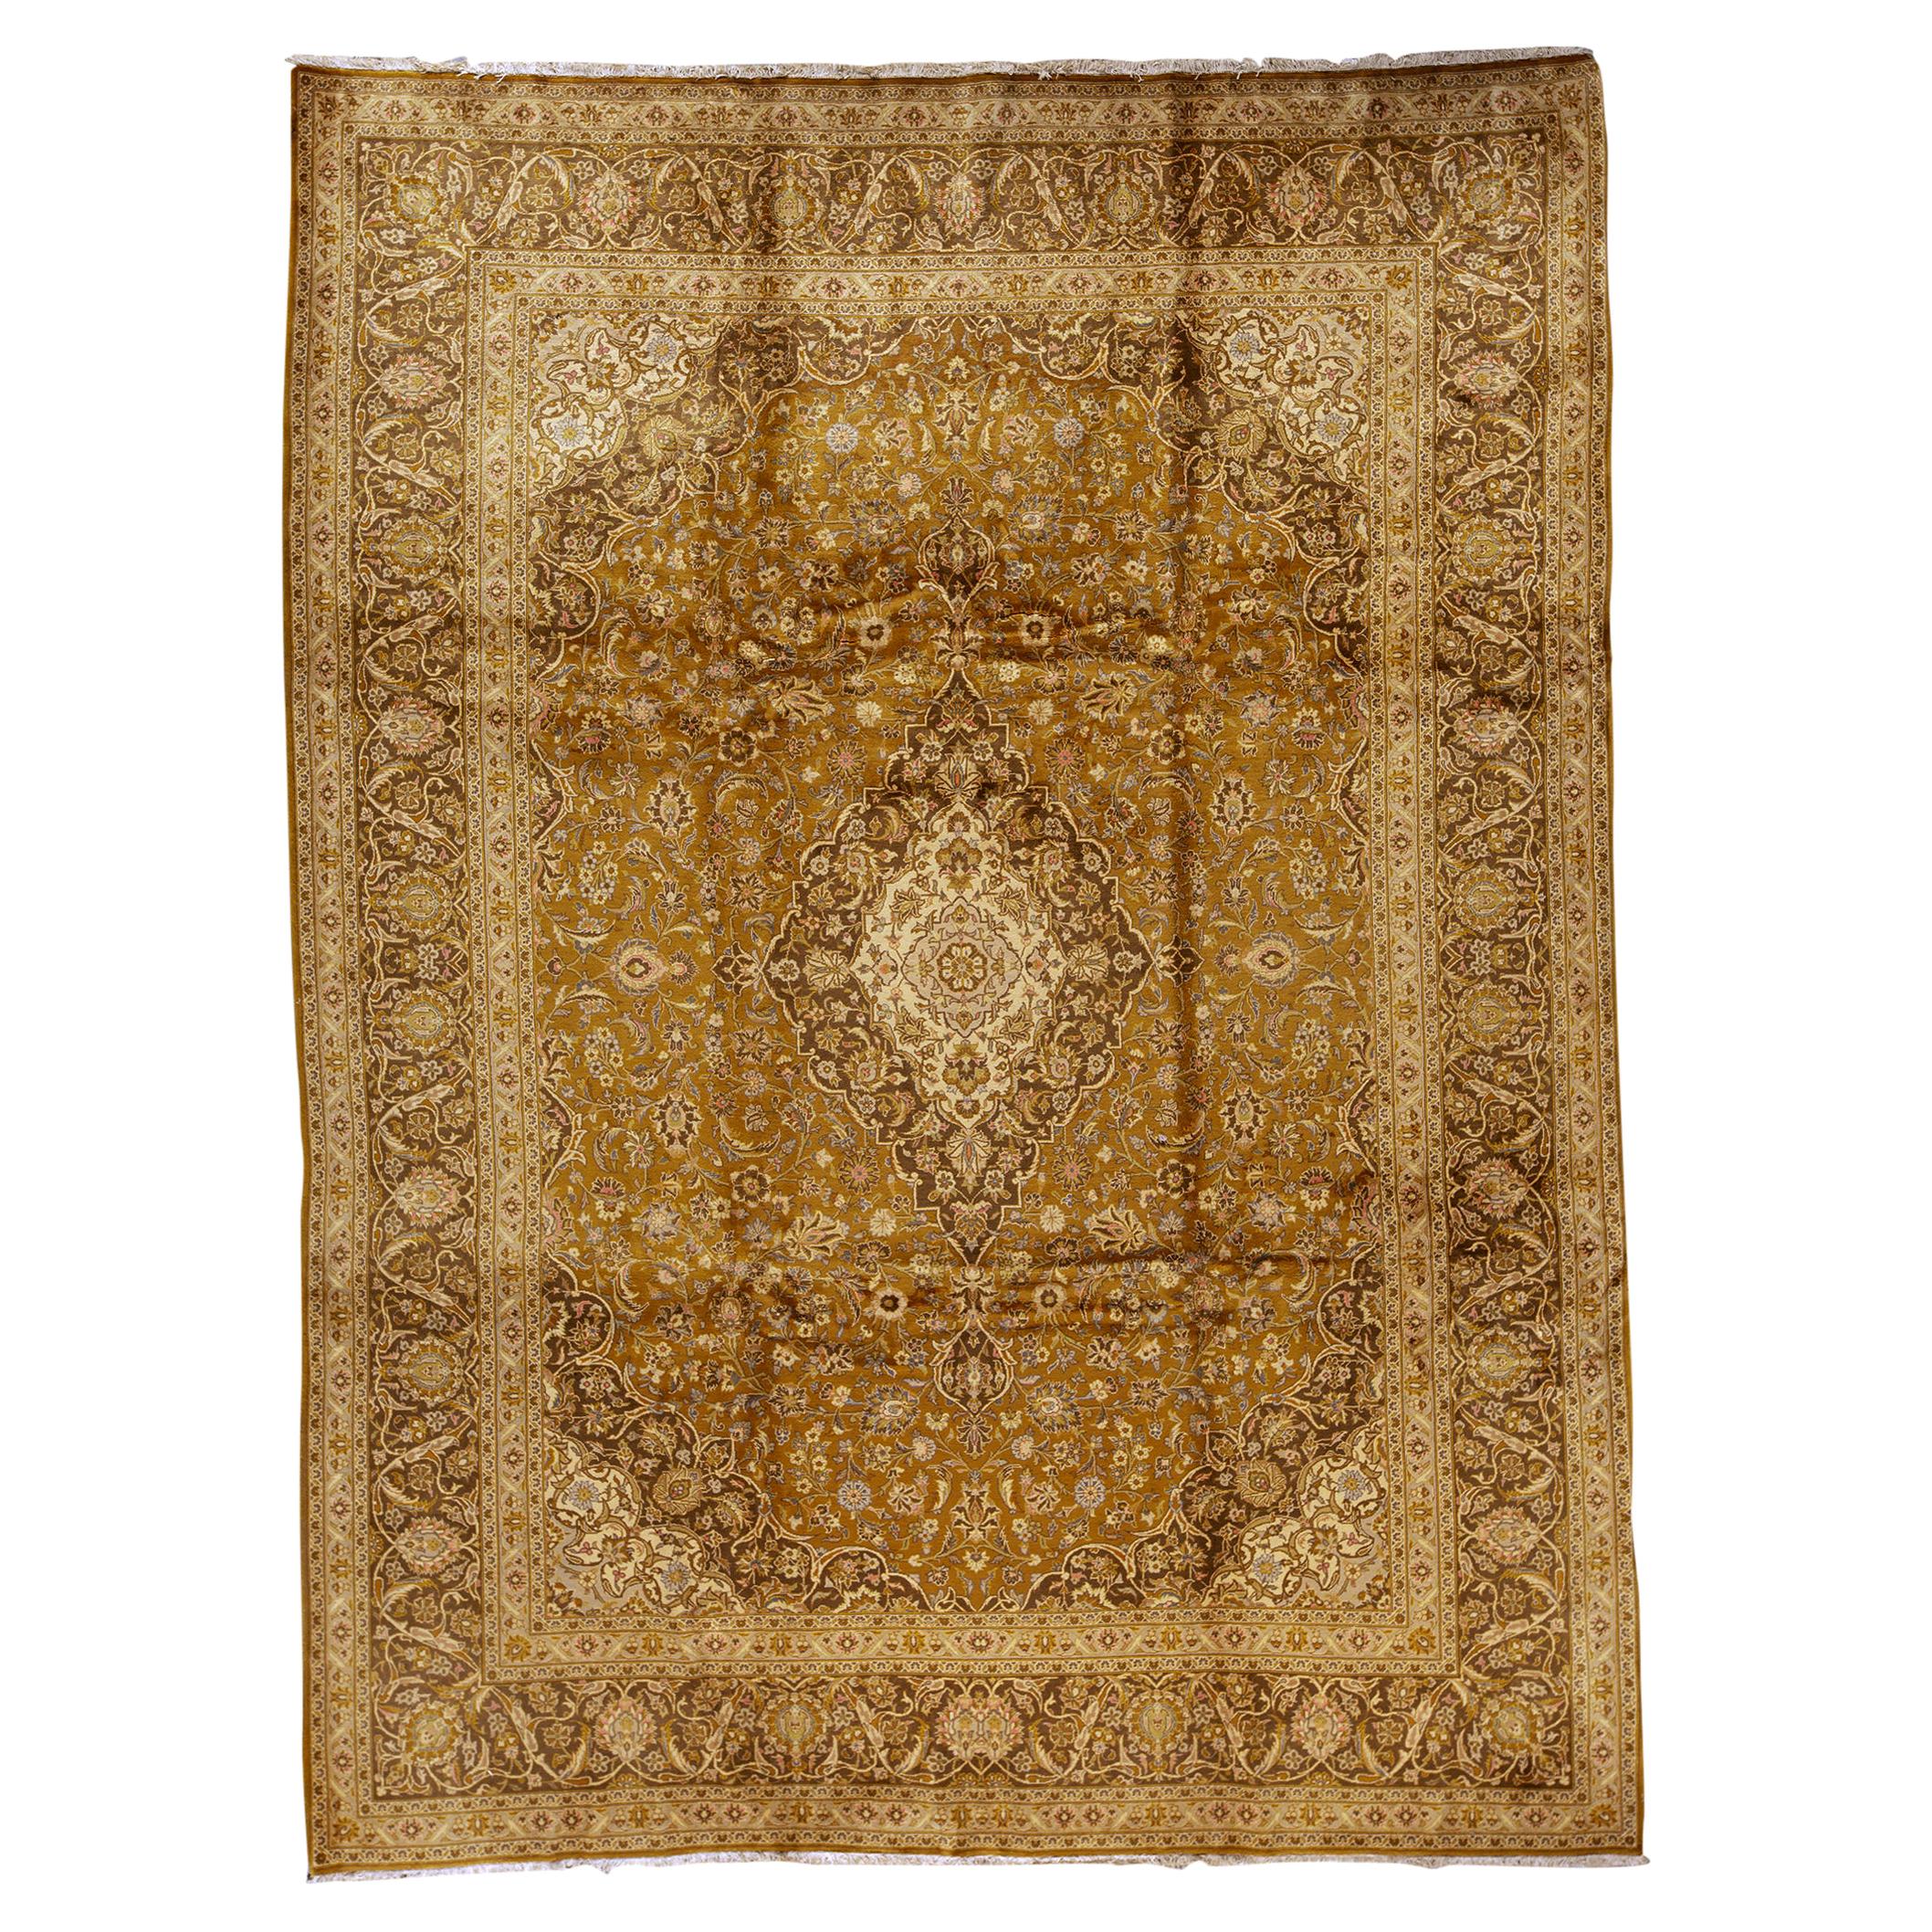   Antique Persian Fine Traditional Handwoven Luxury Wool Brown Rug For Sale